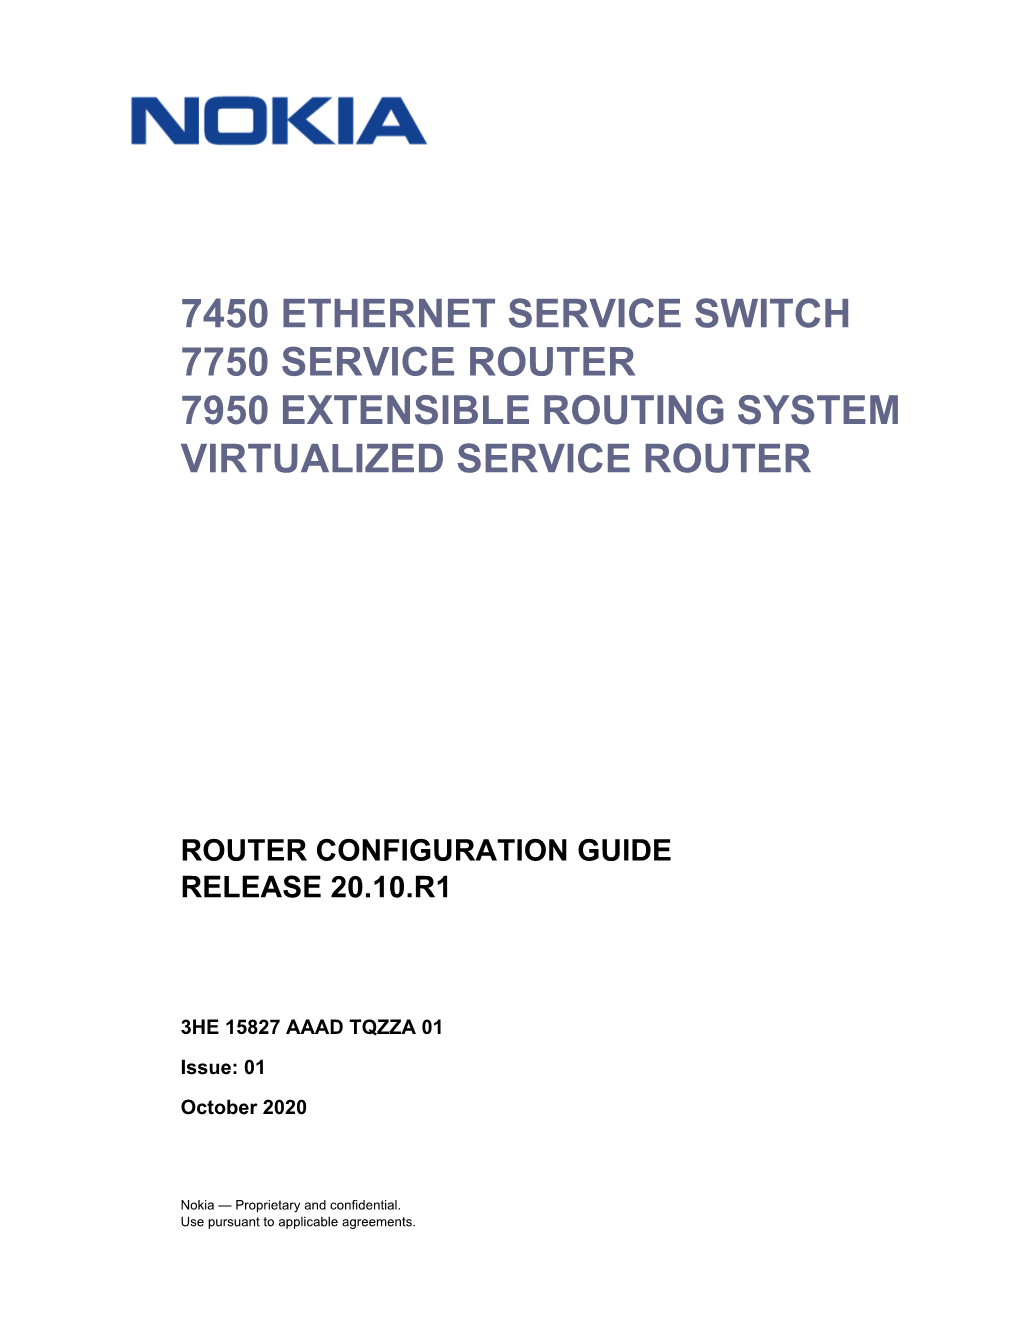 Router Configuration Guide Release 20.10.R1